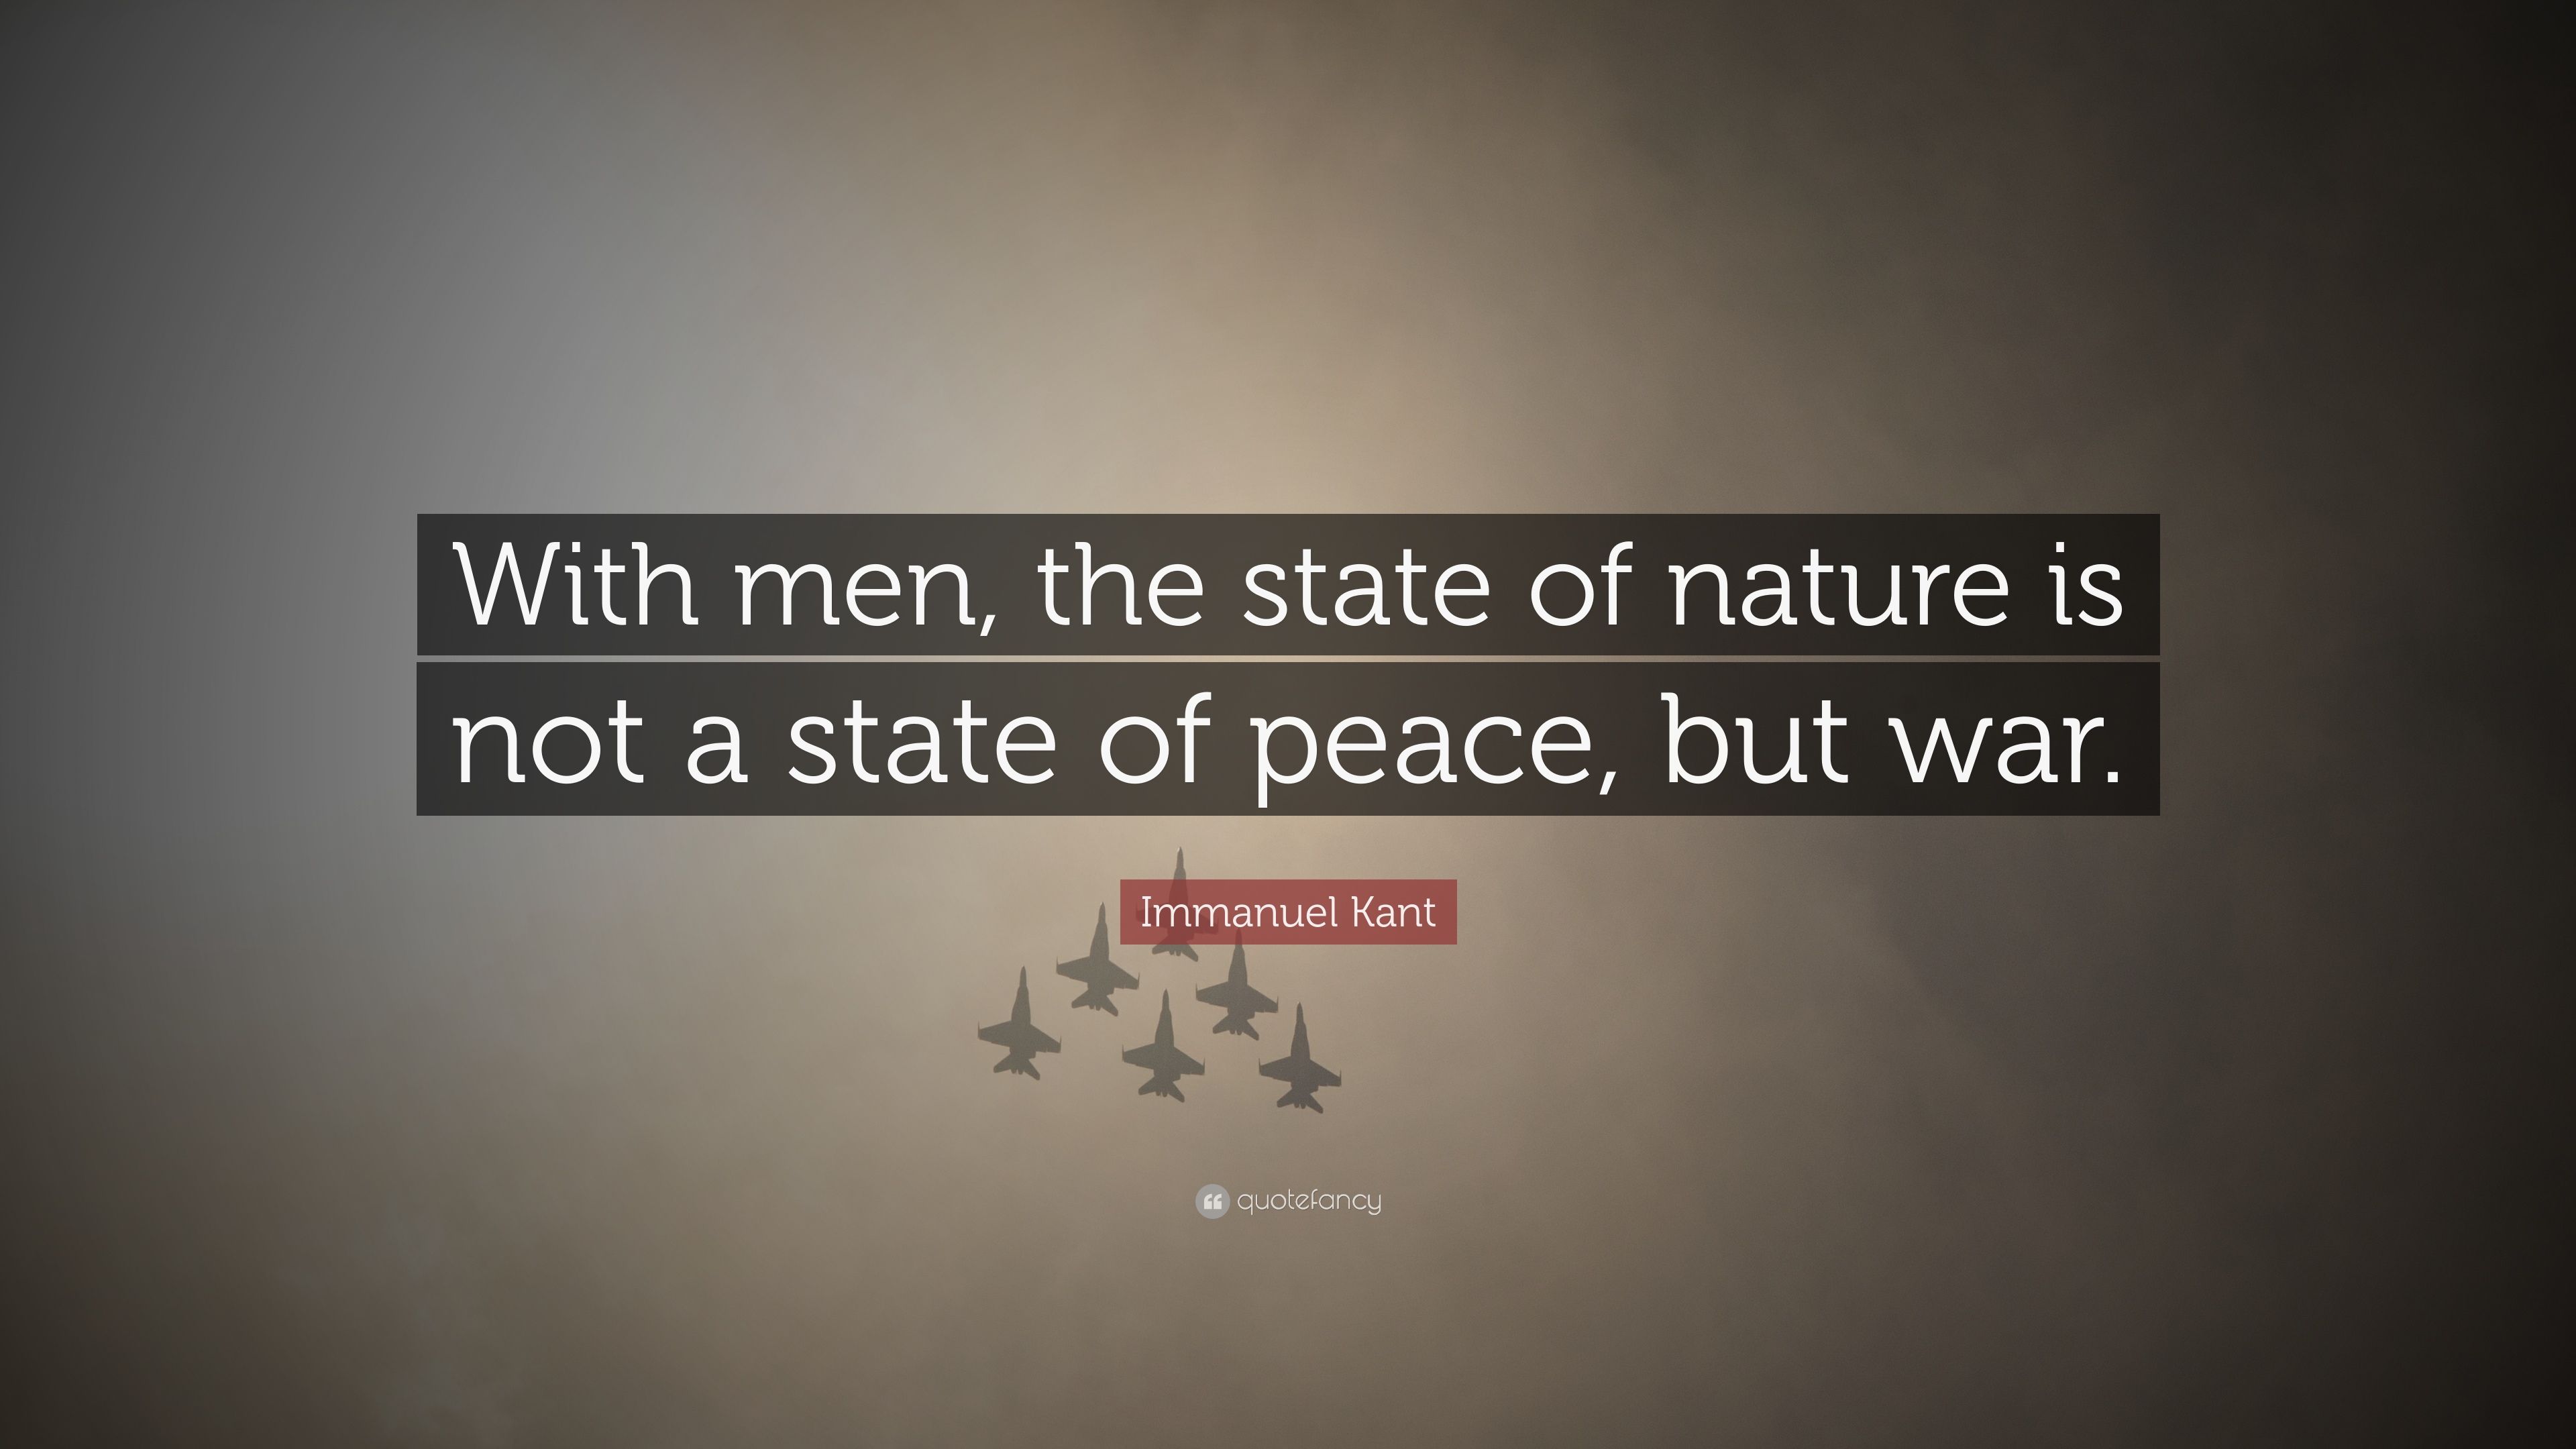 Immanuel Kant Quote: “With men, the state of nature is not a state of peace, but war.” (12 wallpaper)